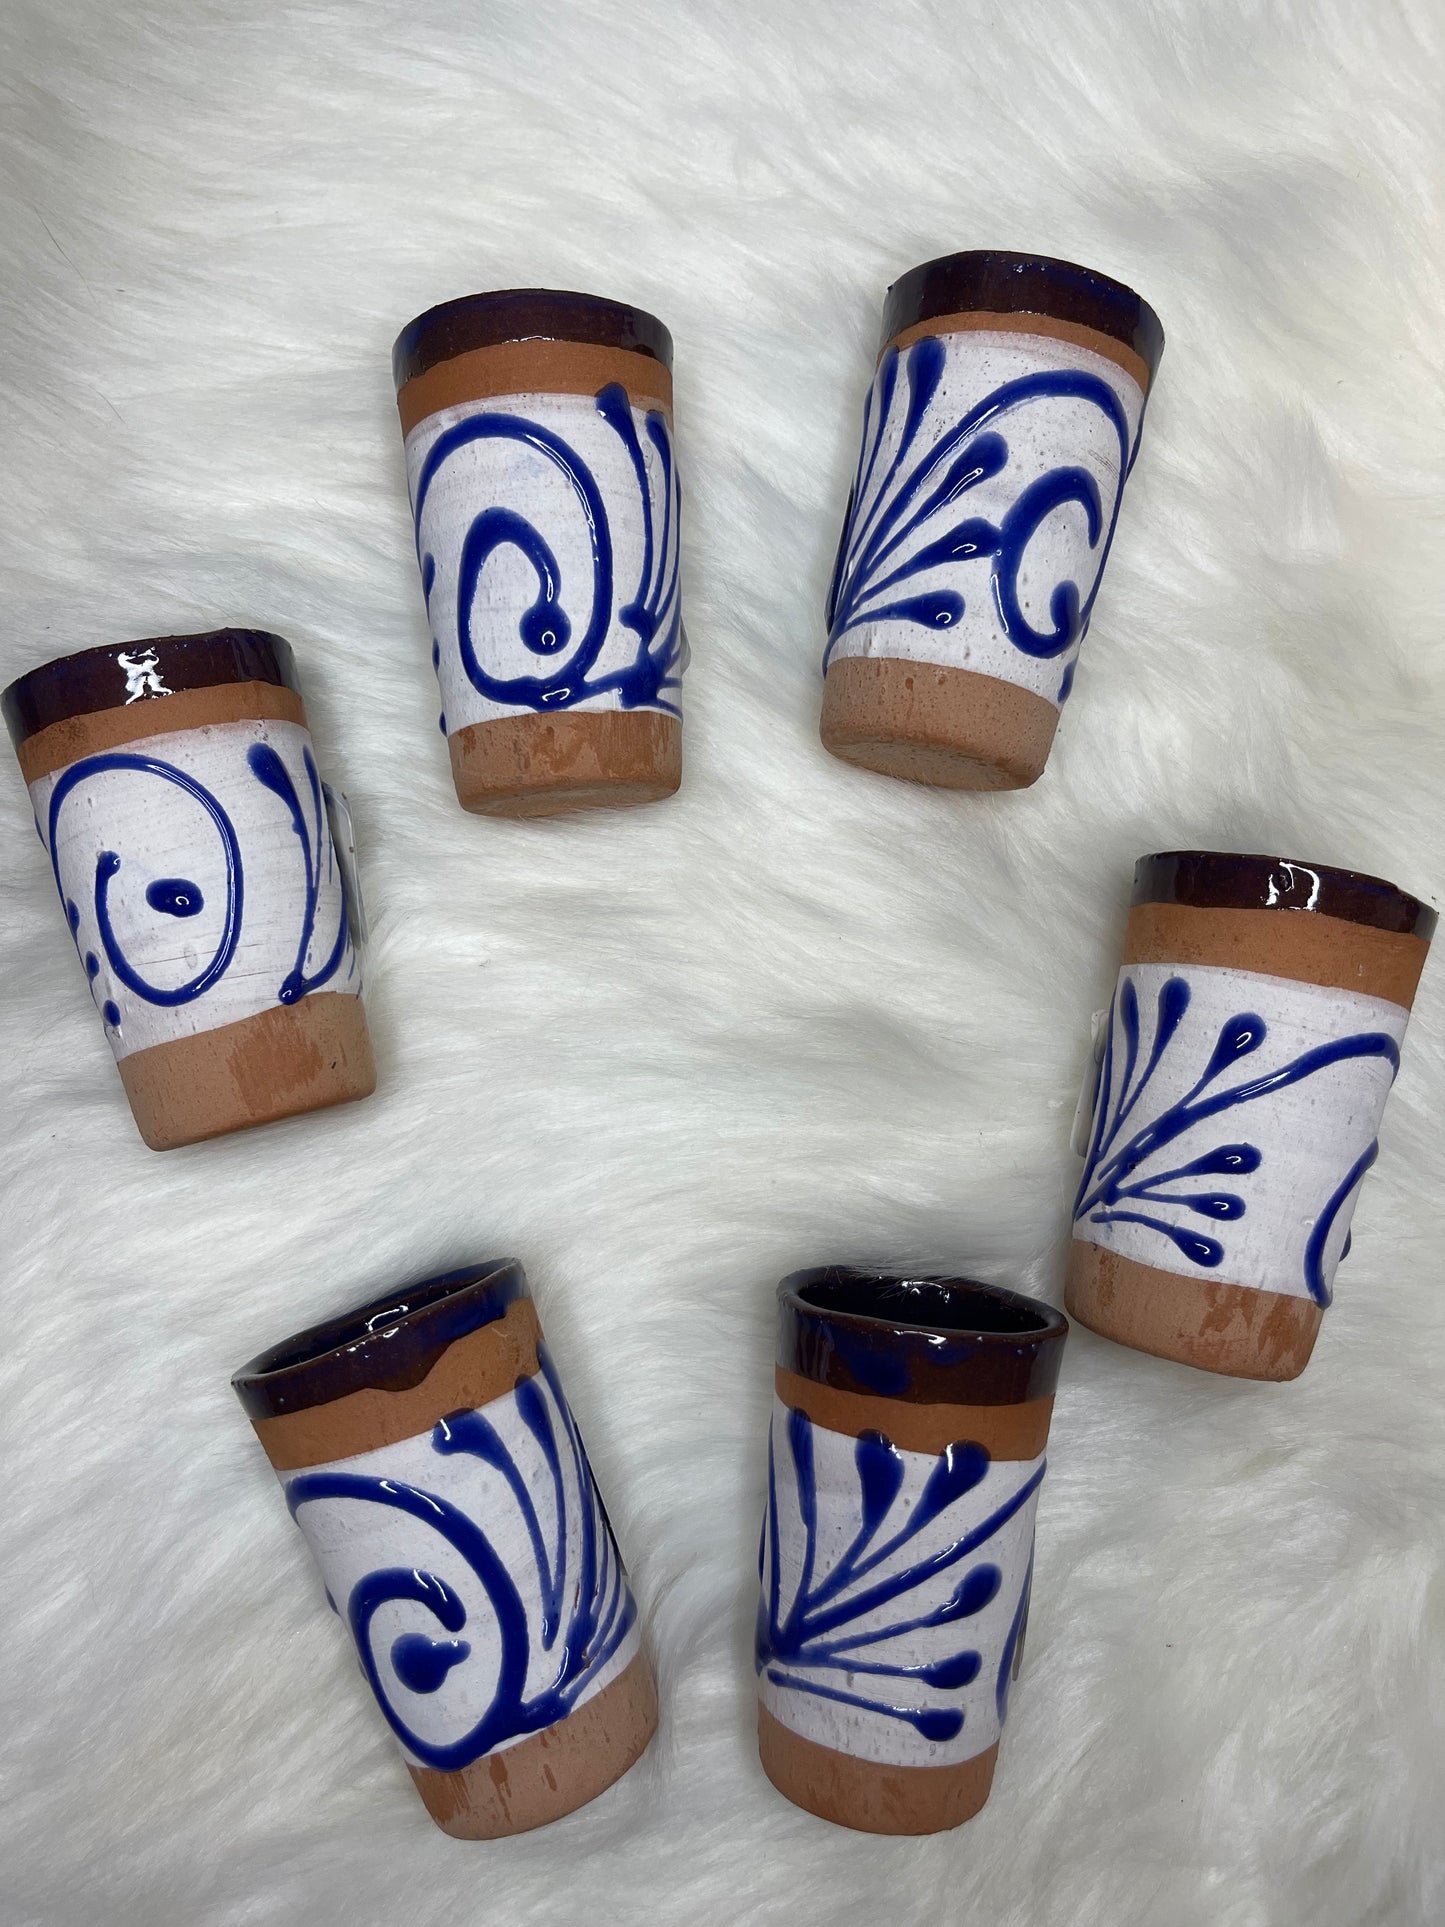 Hand crafted Mexican pottery terracotta glass shots/tequileros de barro